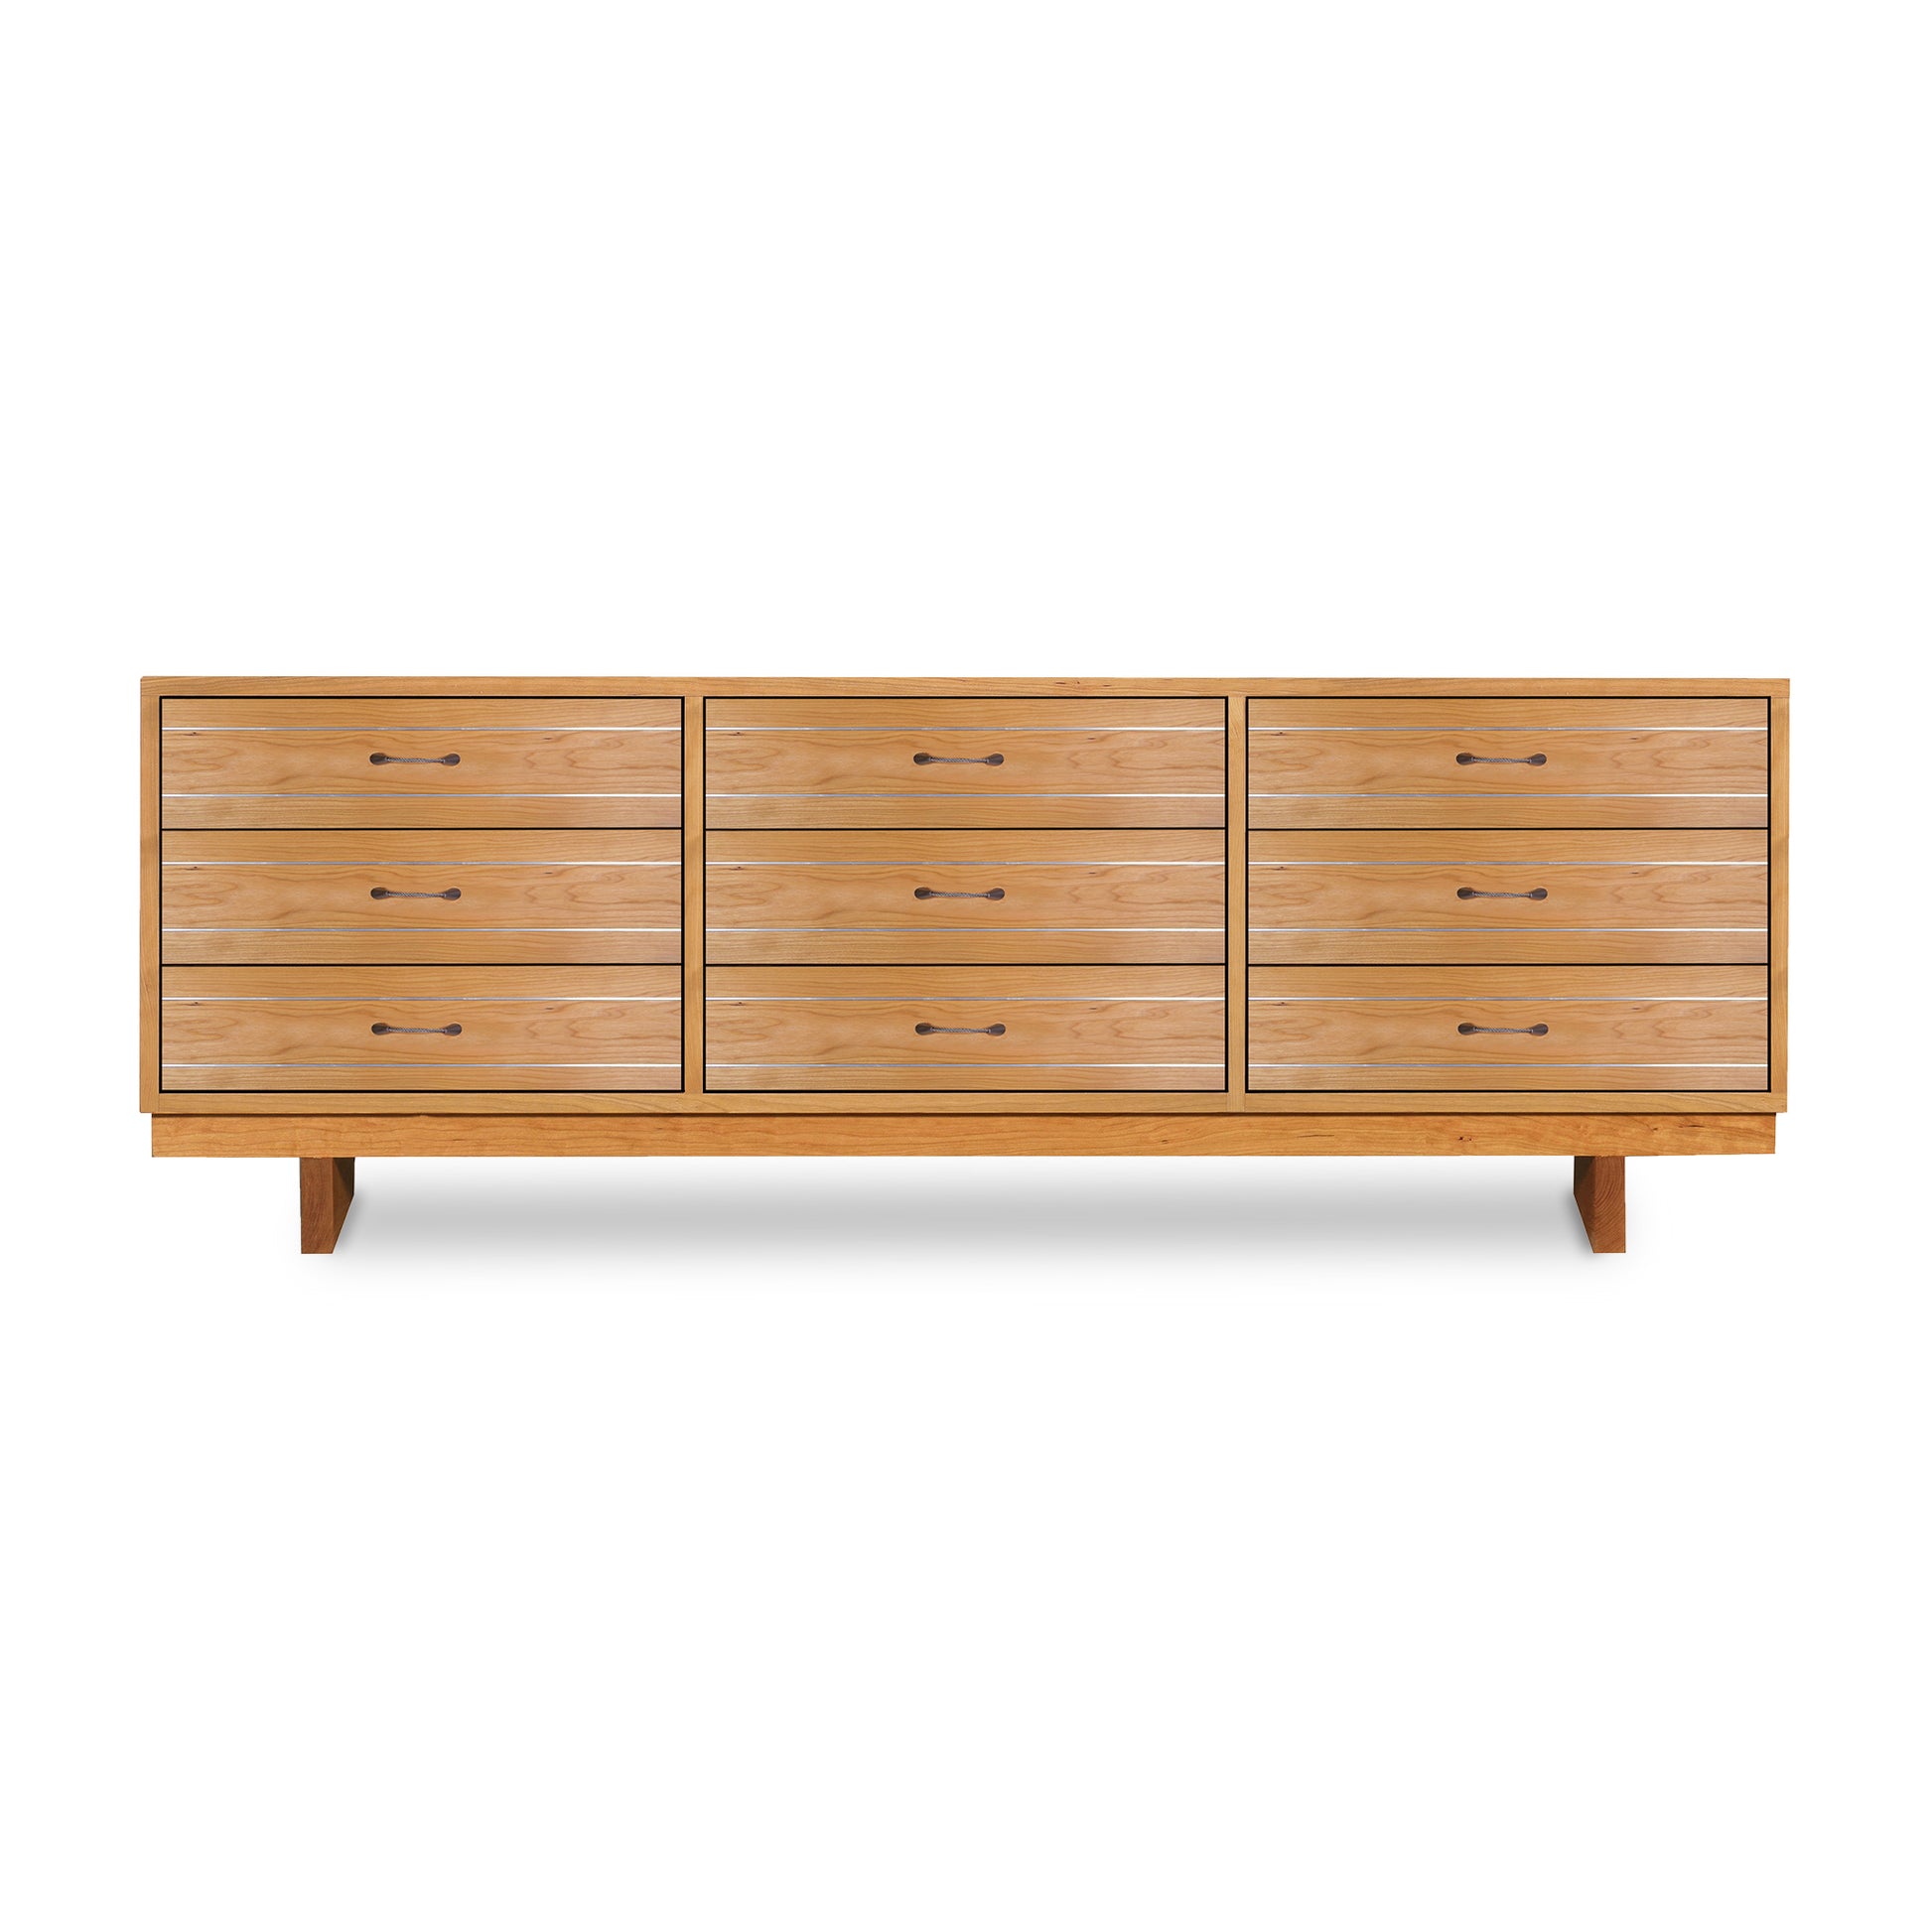 A handcrafted Vermont Furniture Designs Contemporary Cable 9-Drawer Dresser with six drawers and low-profile legs, isolated on a white background.